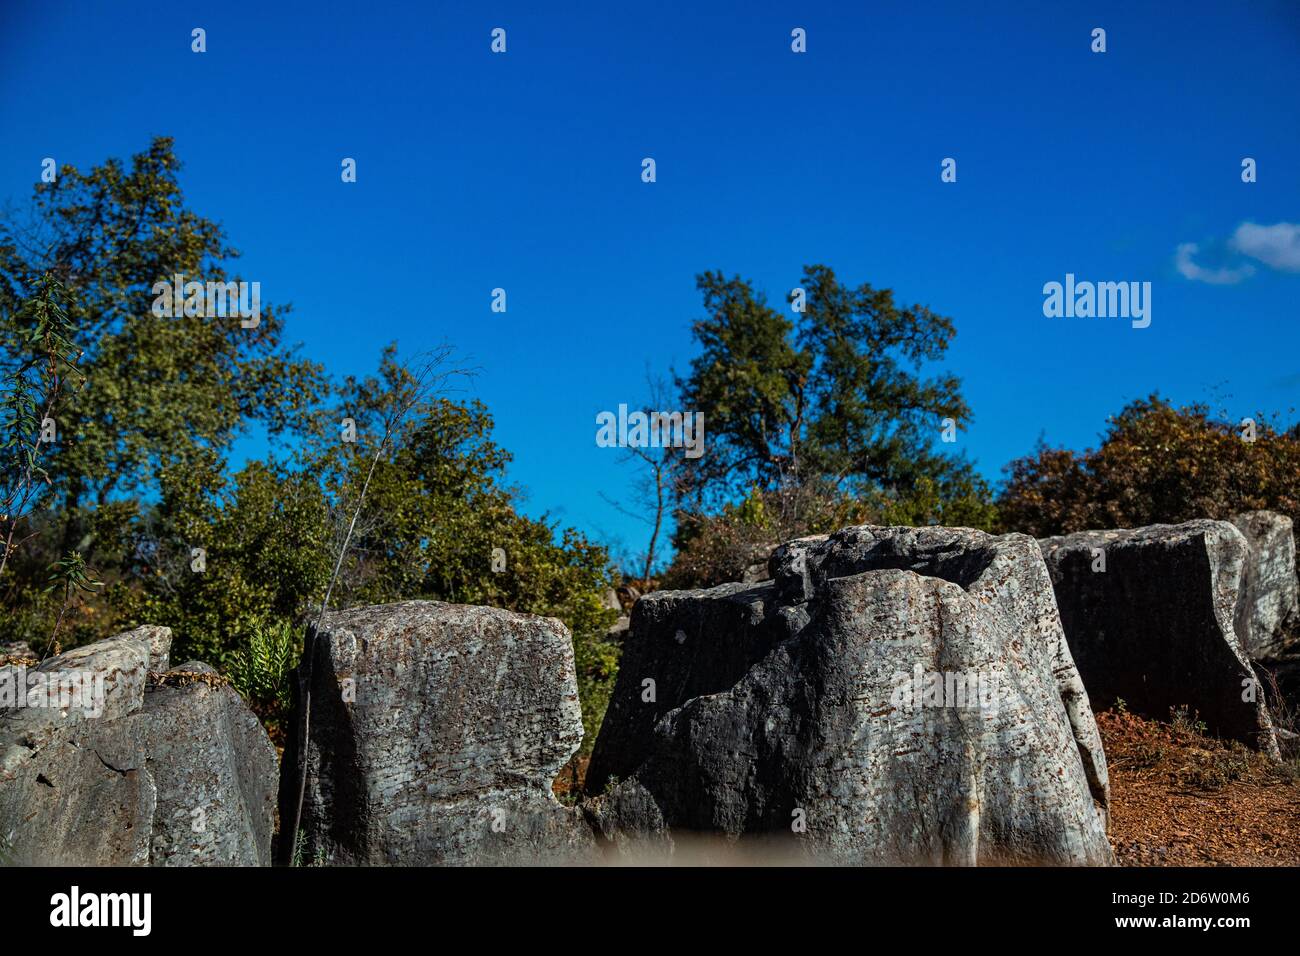 Rounded limestone rock ledges with trees in the background Stock Photo